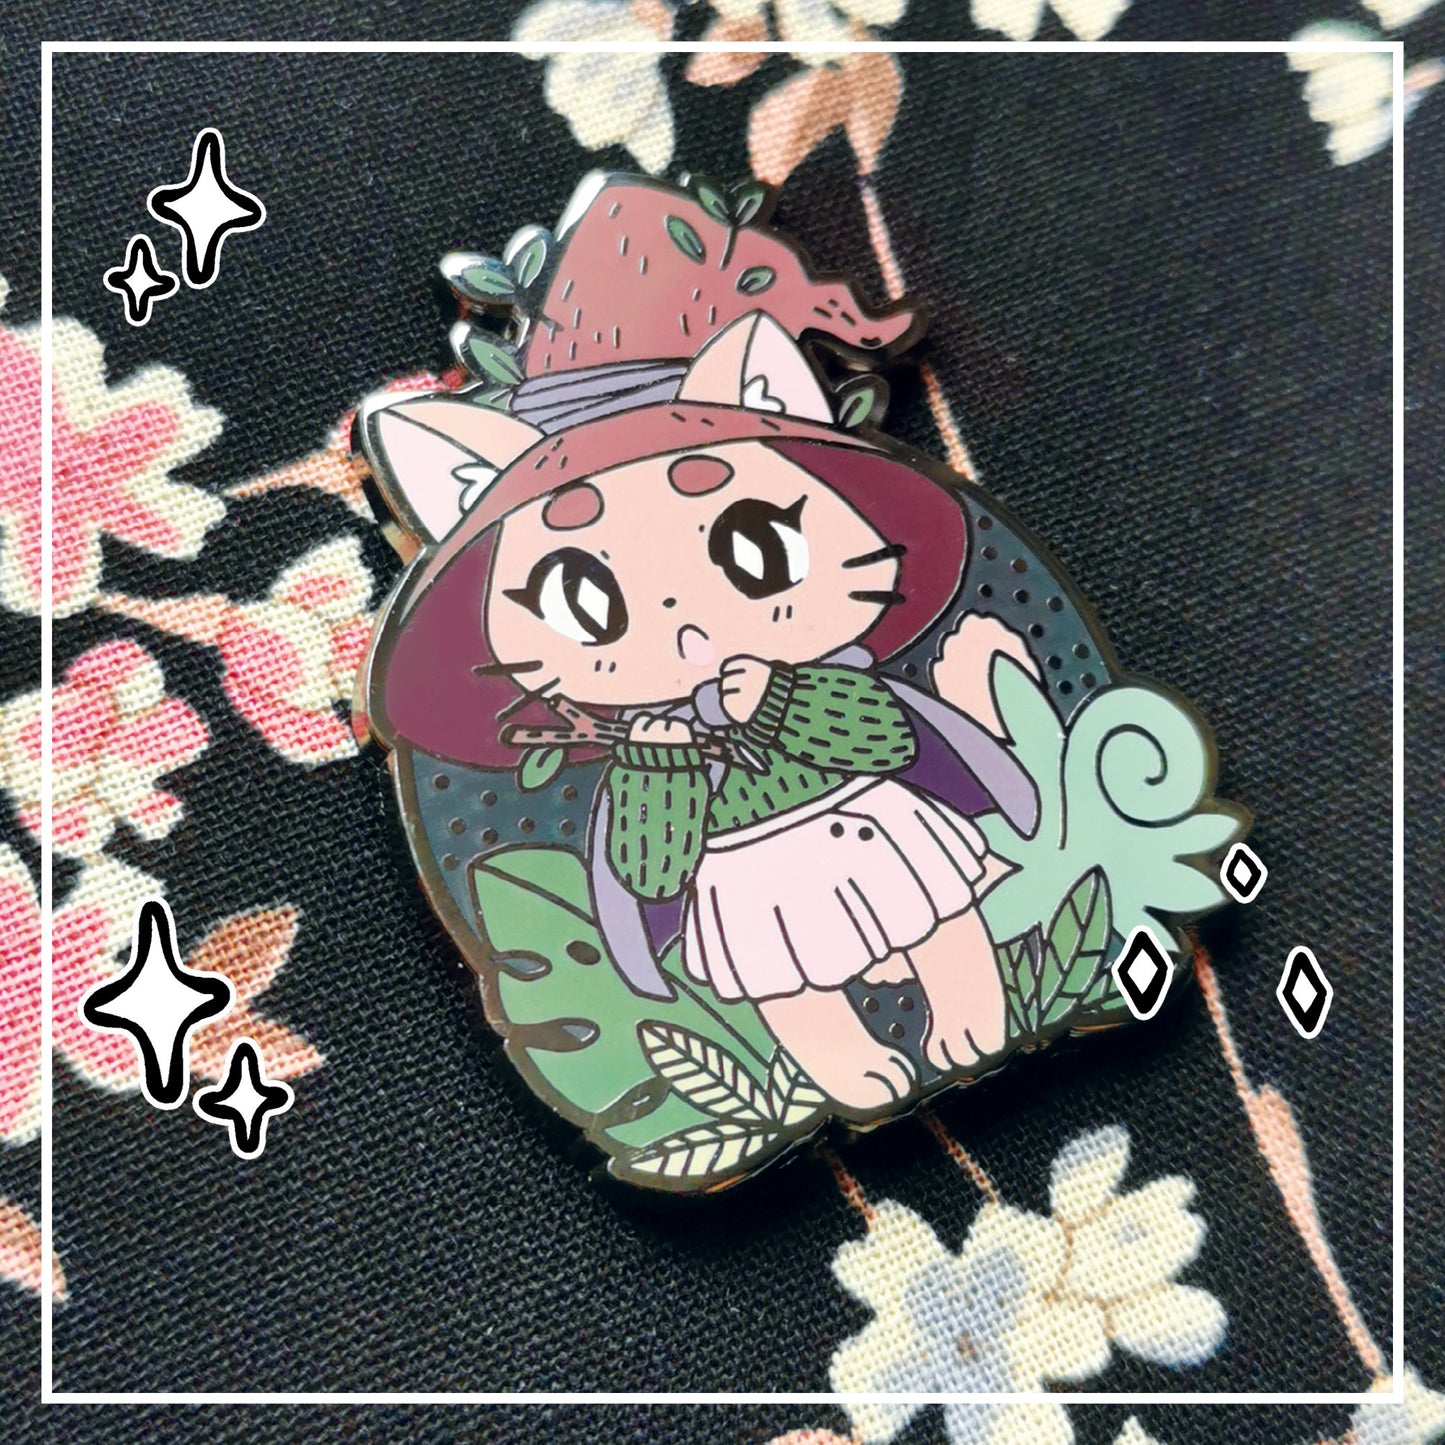 Plant Witch Pin - Little Witch Acatemia Cat Witch Talisman Pins